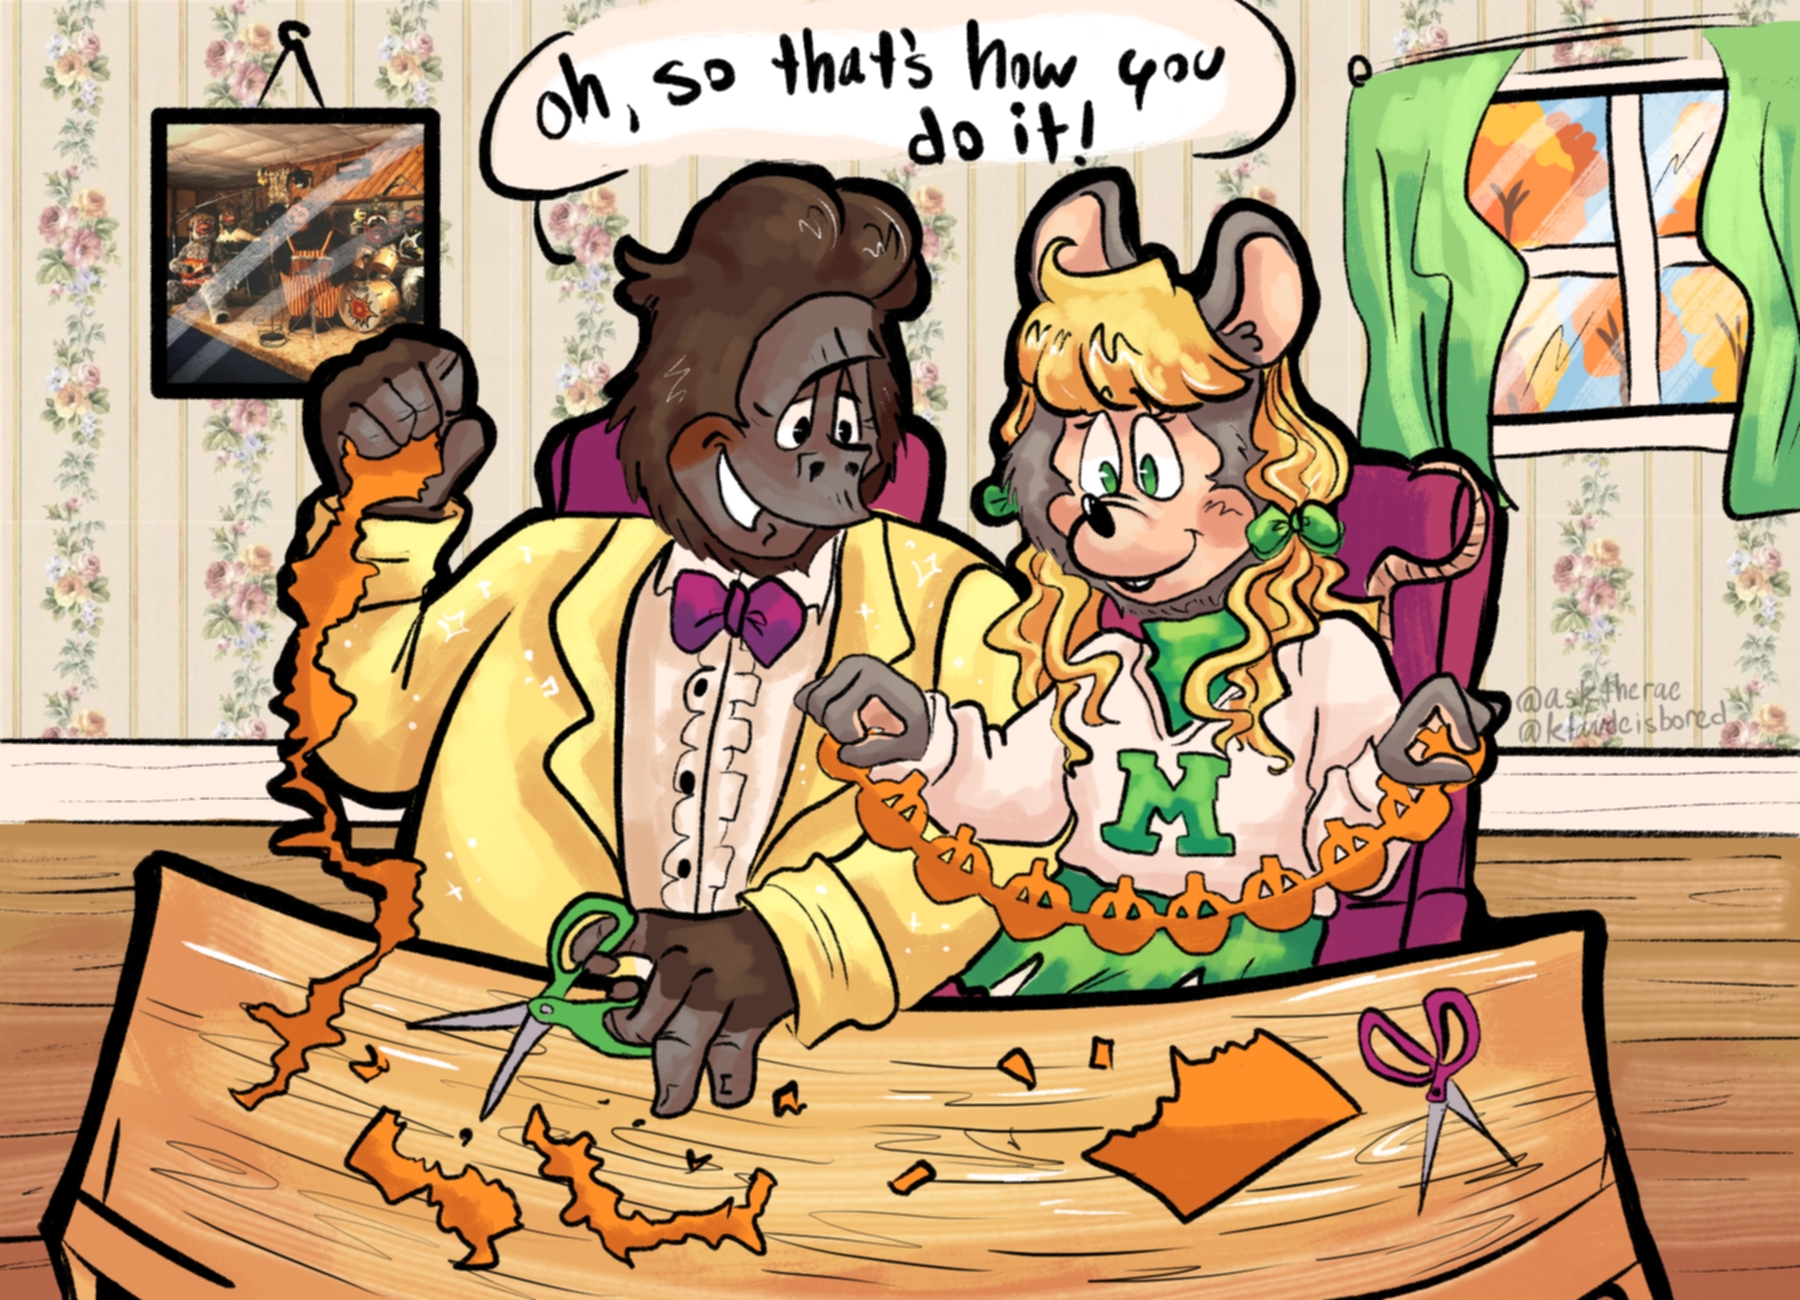 A digital drawing of Fatz and Mitzi making paper chains representing pumpkins at a dinner table within a cozy house during autumn. Mitzi makes a perfect pumpkin paper chain, but Fatz's is cut up terribly. He looks at Mitzi's chain and remarks, 'Oh, so thats how how you it!'